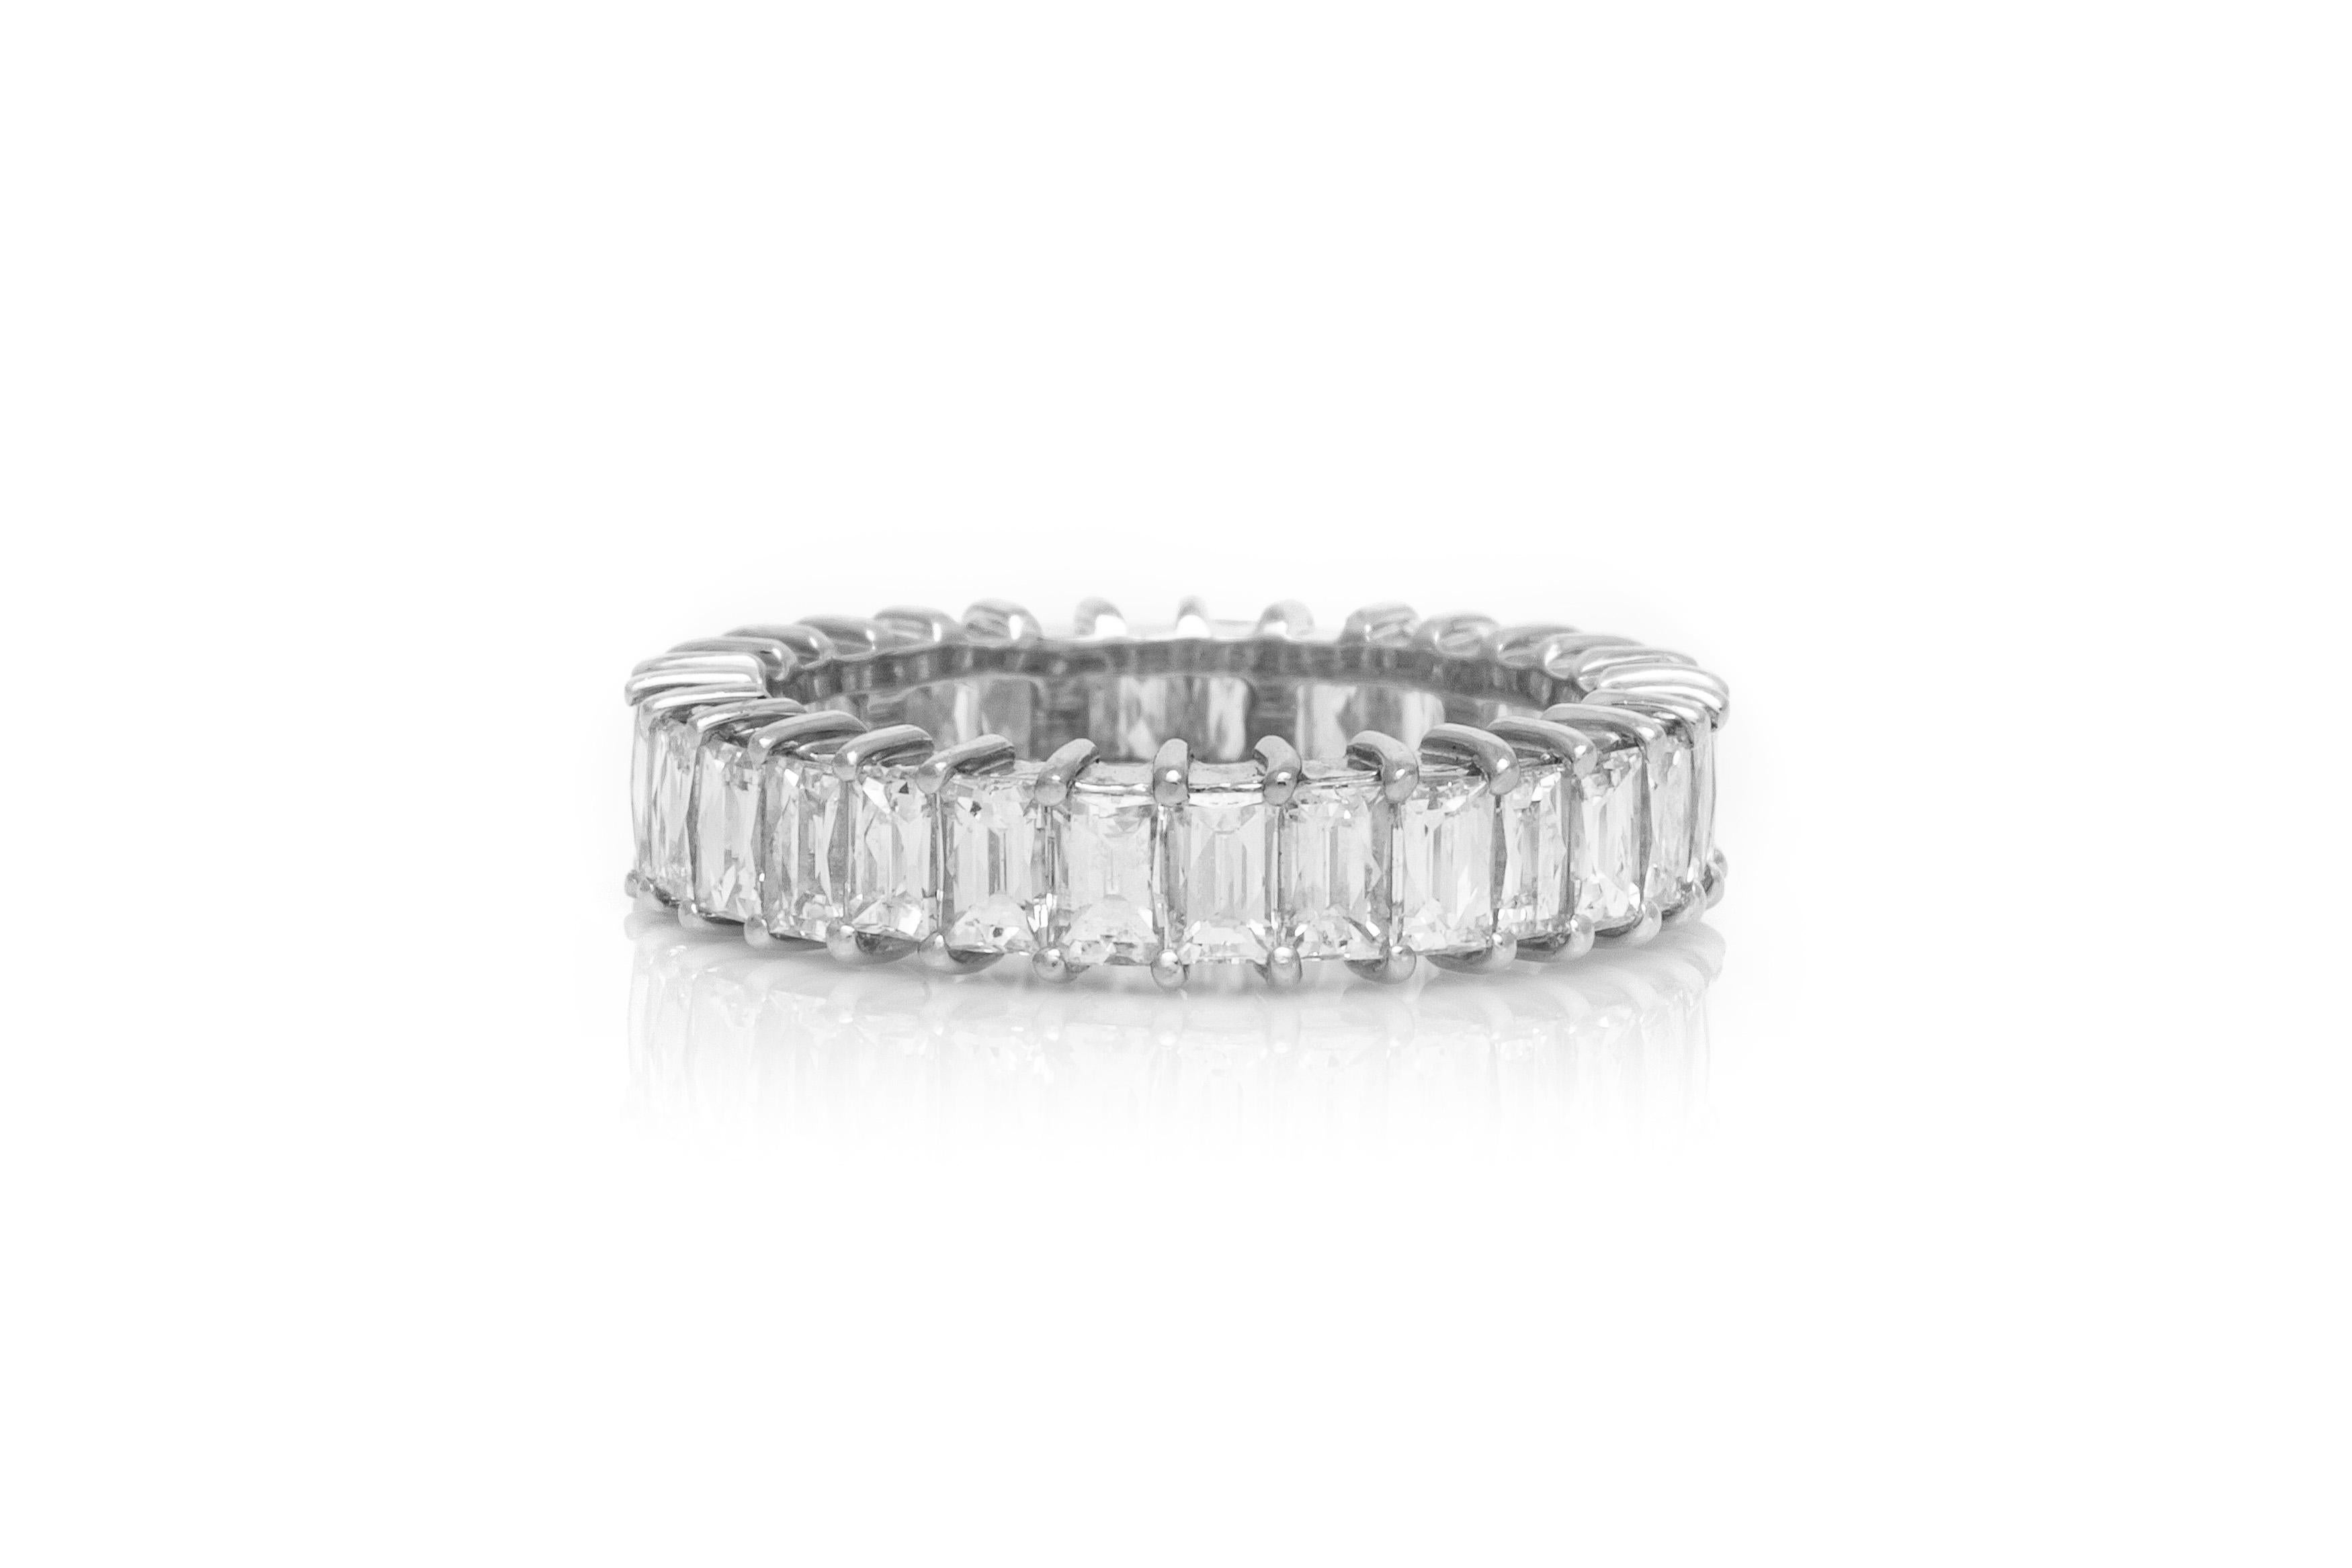 The ring is finely crafted in platinum with emerald cut all over weighing approximately total of 4.01 carat.